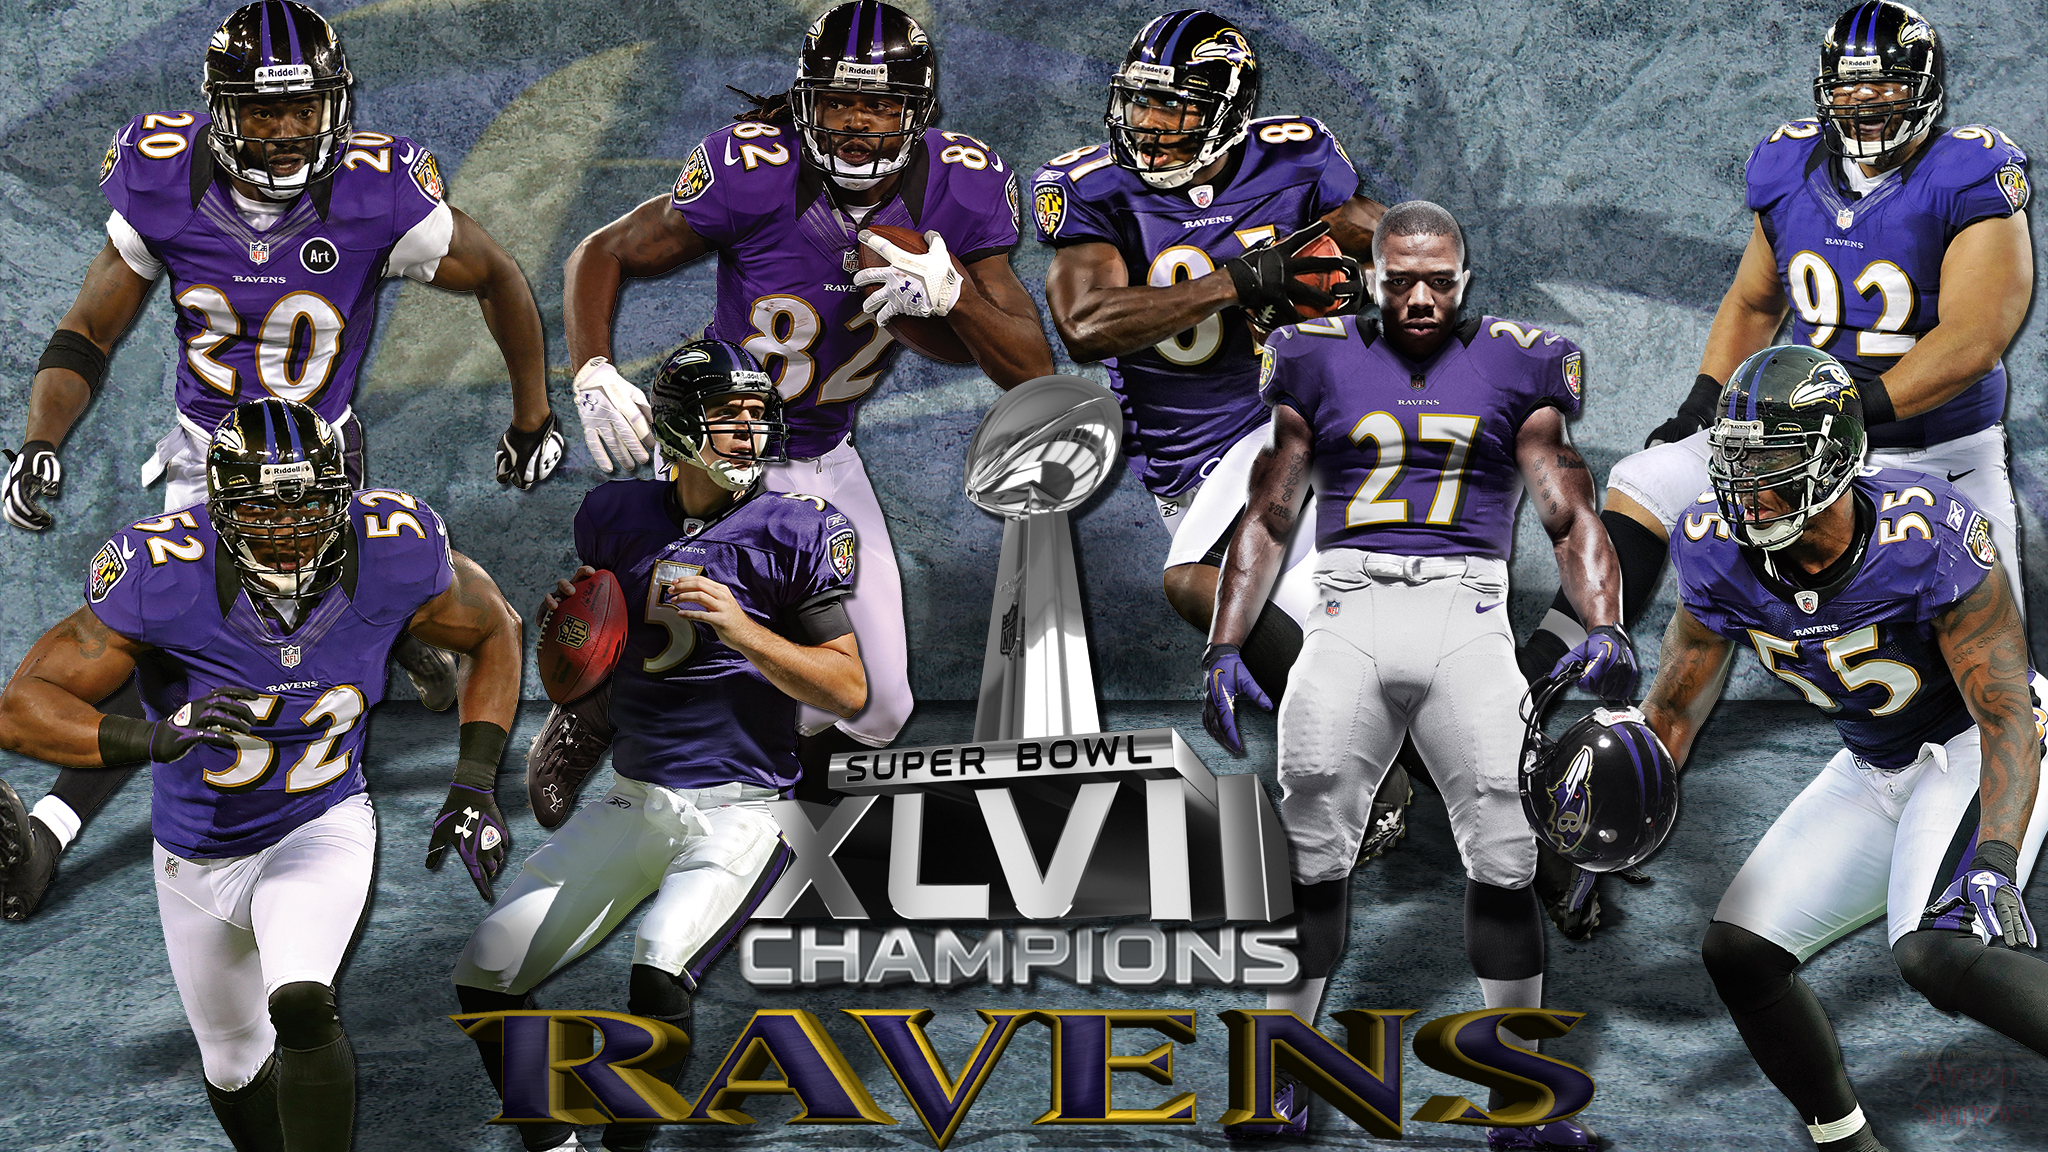 Wallpaper By Wicked Shadows Baltimore Ravens Super Bowl Xlvii